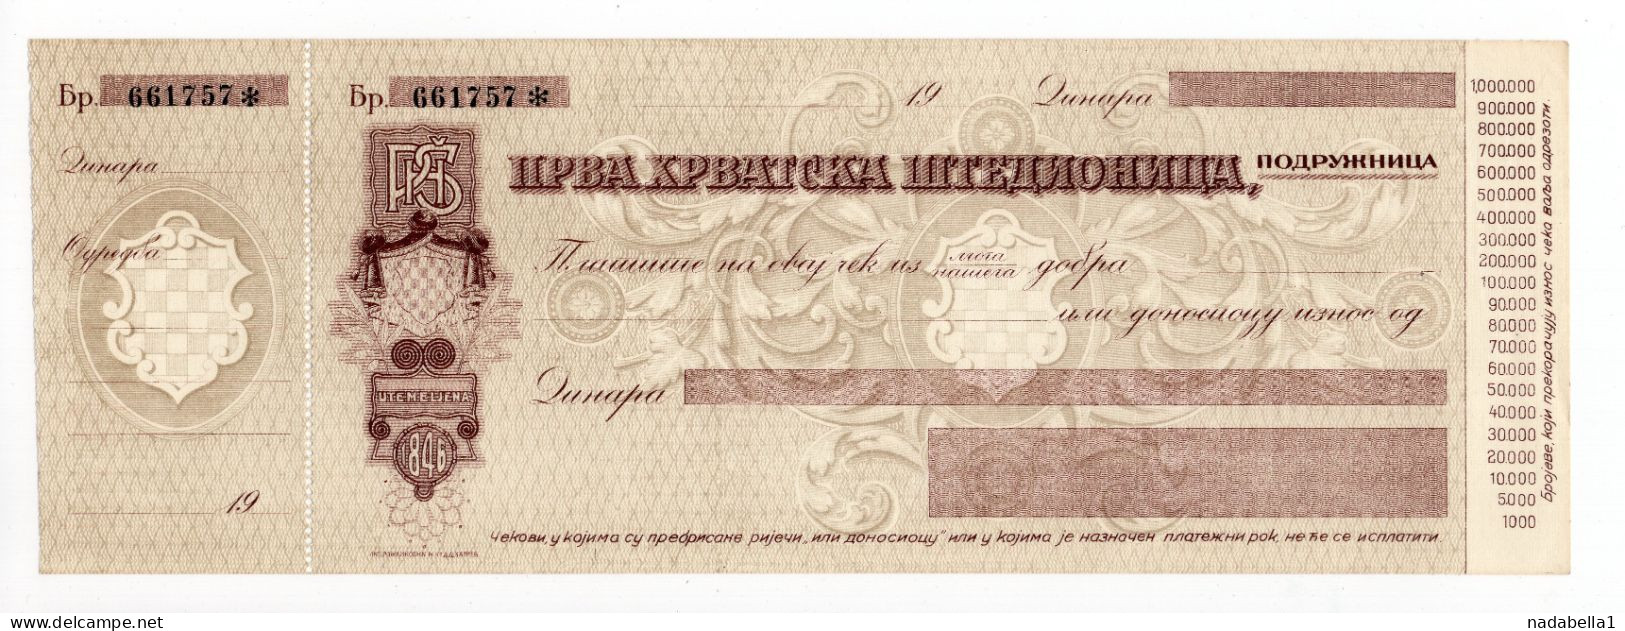 1920? KINGDOM OF SHS,CROATIA,CHEQUE,FIRST CROATIAN SAVINGS BANK,ESTABLISHED IN 1846.CYRILLIC TEXT - Cheques En Traveller's Cheques